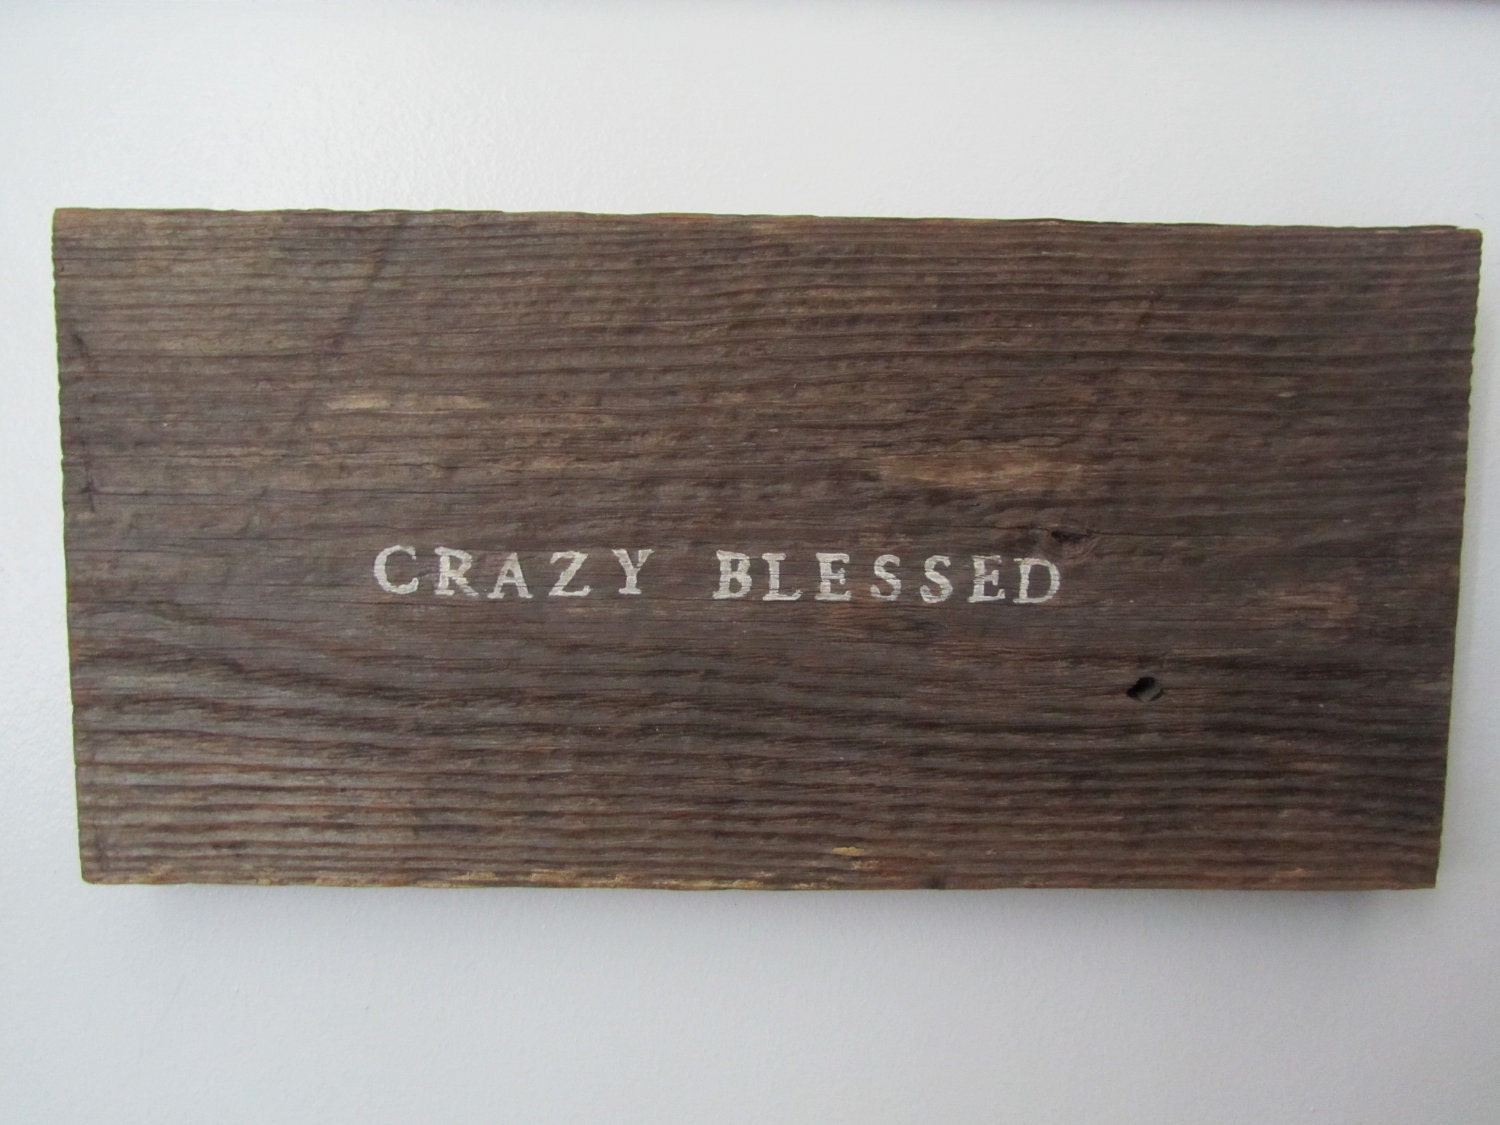 Crazy Blessed hand painted barn wood board